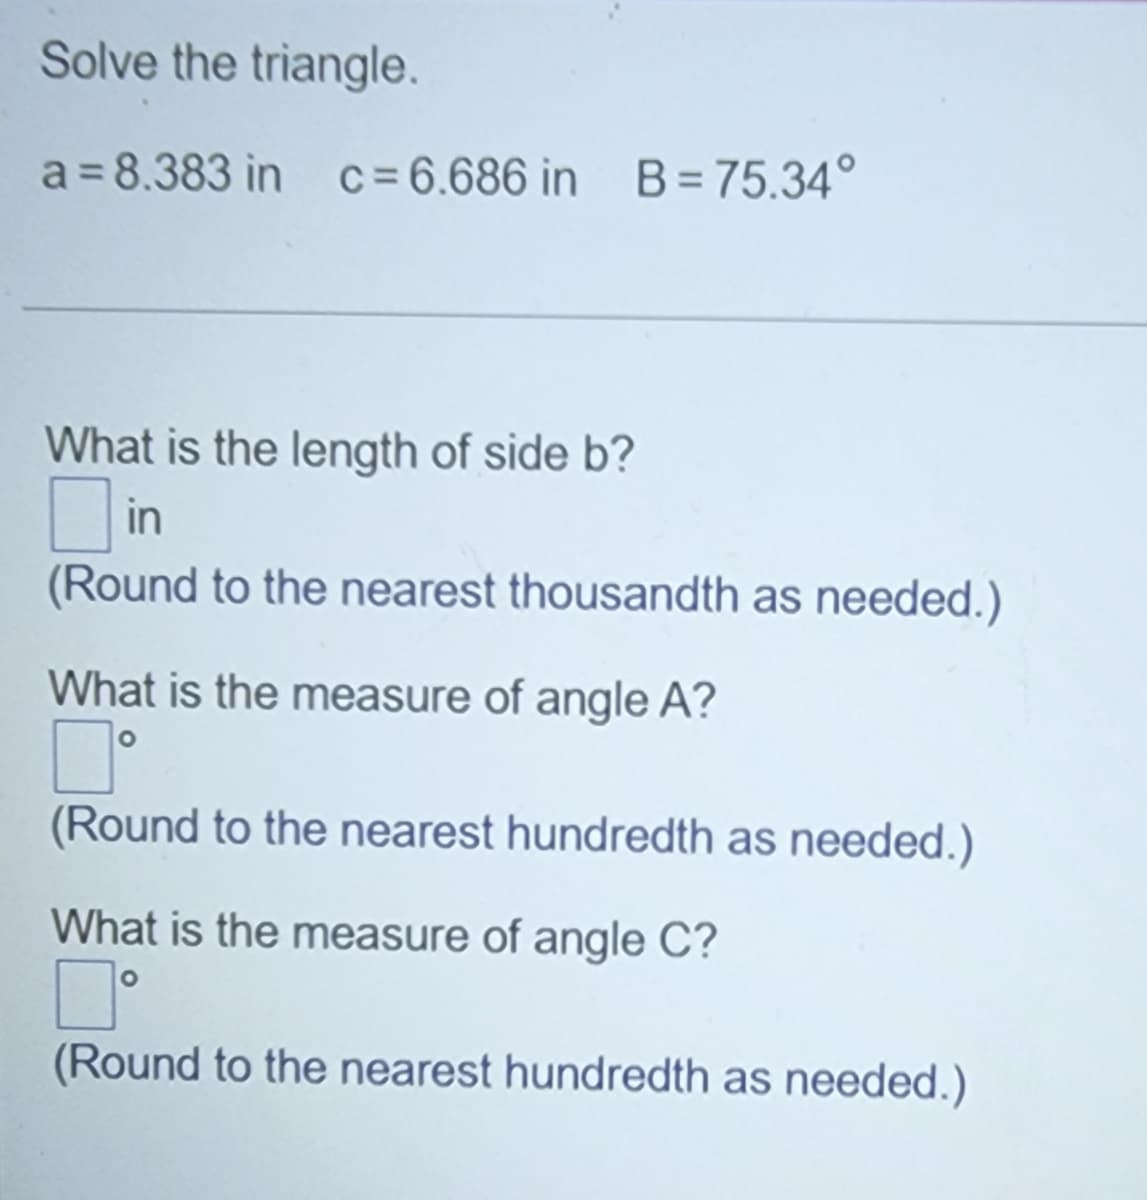 Solve the triangle.
a = 8.383 in c=6.686 in B = 75.34°
What is the length of side b?
in
(Round to the nearest thousandth as needed.)
What is the measure of angle A?
(Round to the nearest hundredth as needed.)
What is the measure of angle C?
(Round to the nearest hundredth as needed.)
